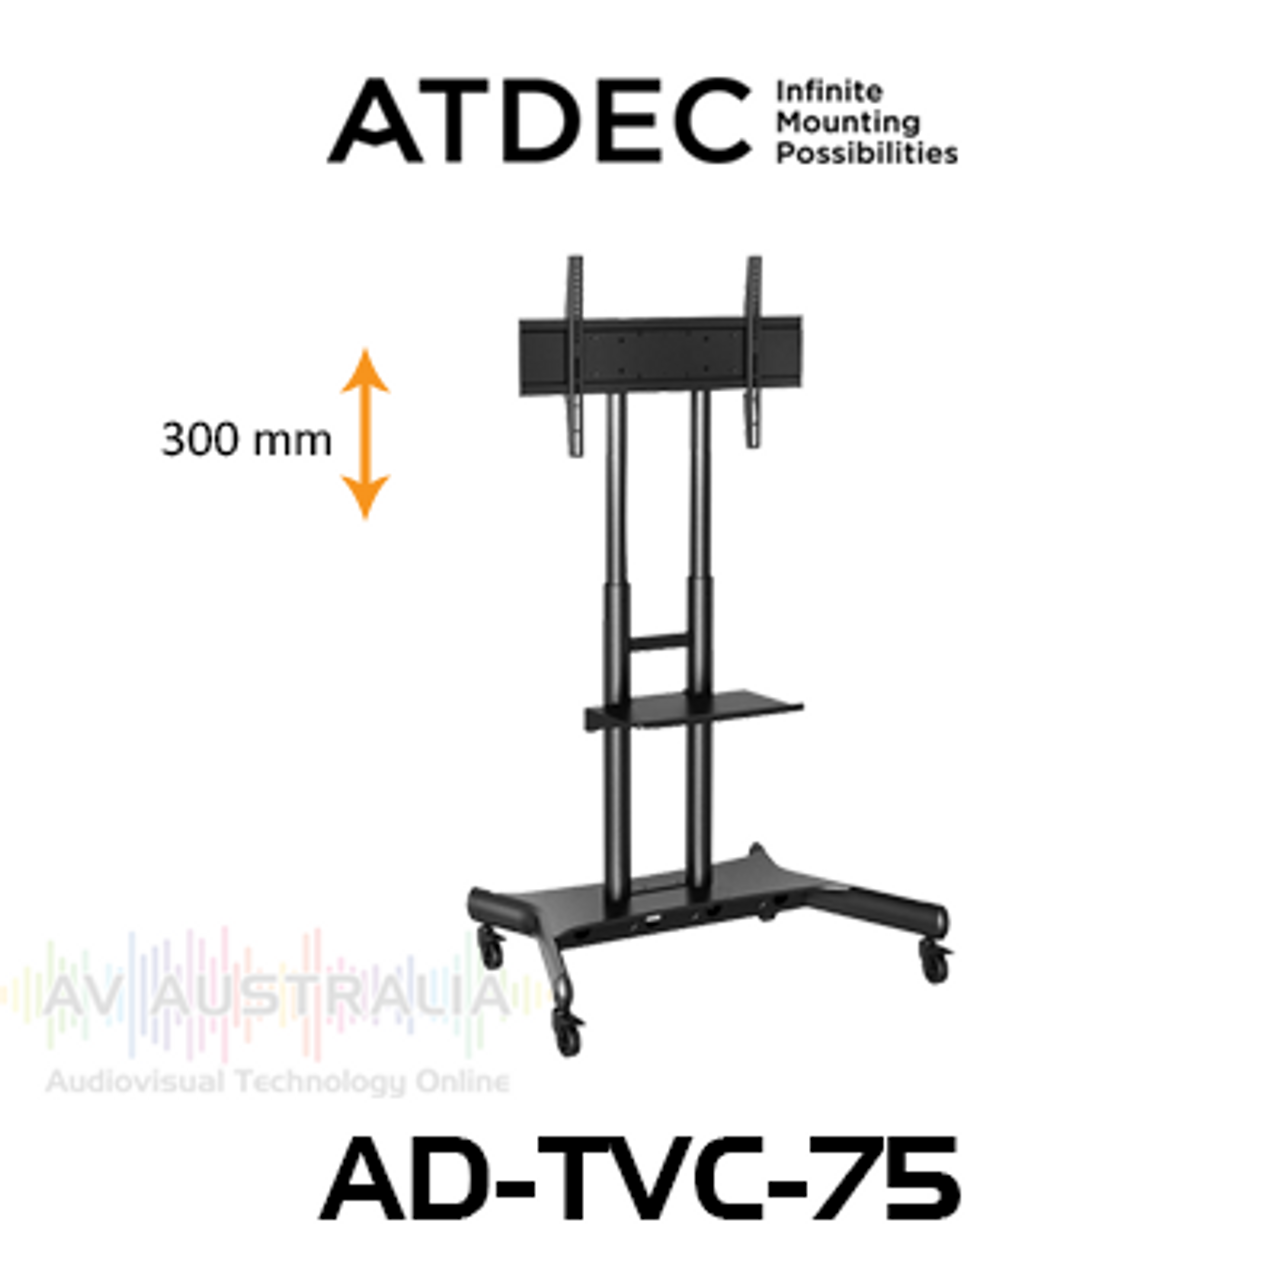 Atdec AD-TVC-75 50"-80" Video Conferencing Mobile TV Trolley (75kg Max)